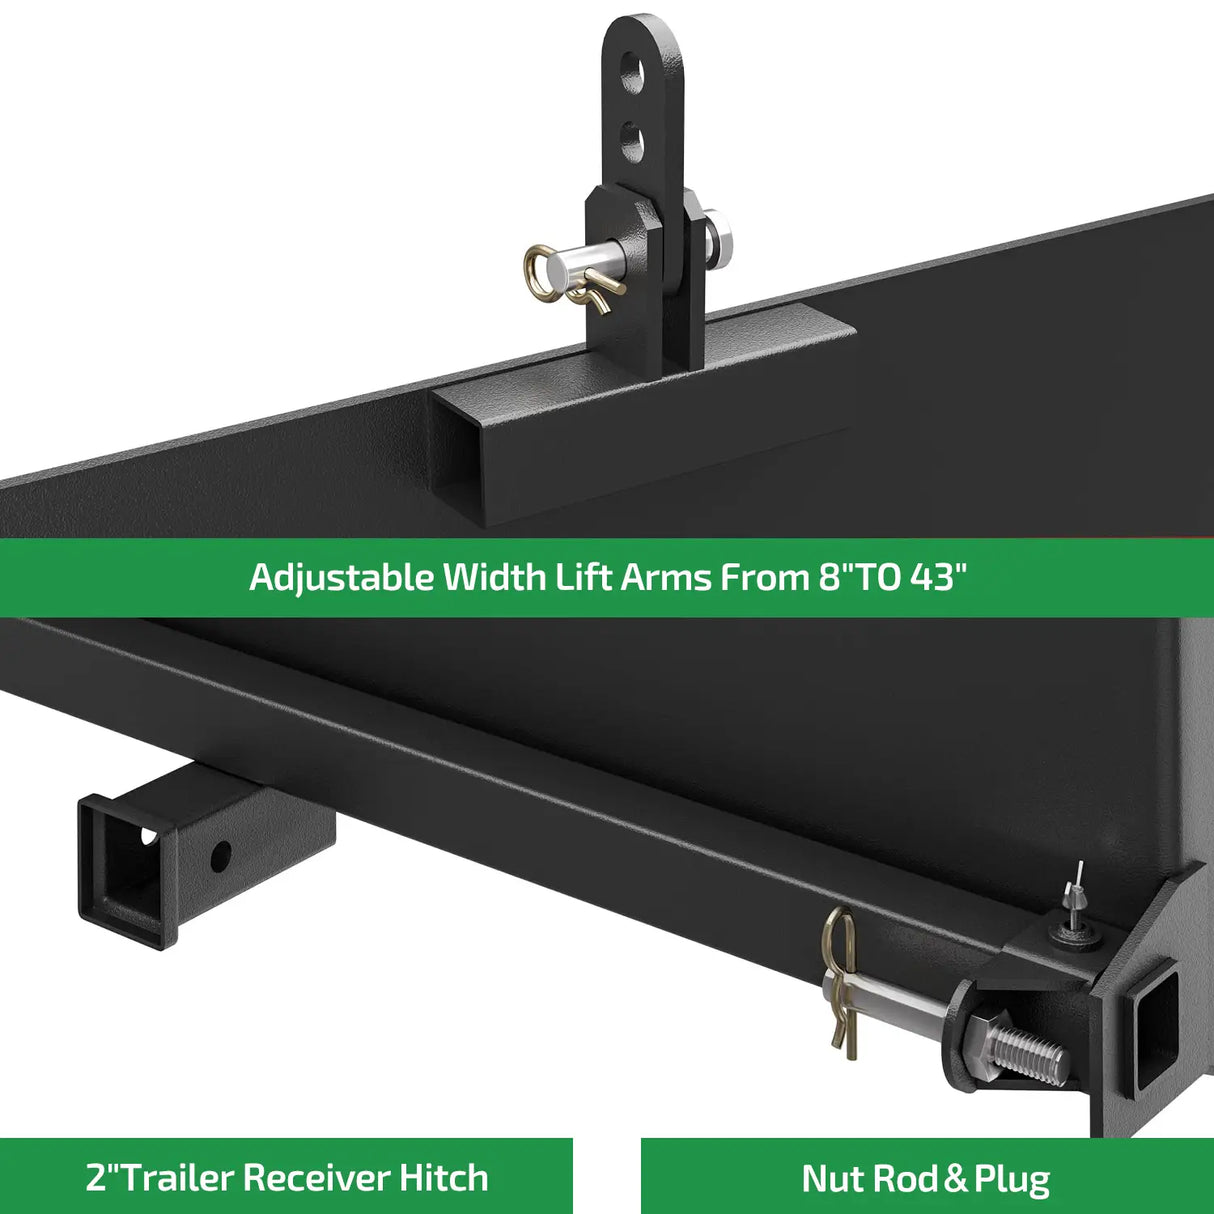 5/16" Universal 3 Point Attachment Adapter Skid Steer Plate 2 Inch Trailer Hitch Receiver Adjustable Width Lift Arms from 8" to 43" for Front Loader Case